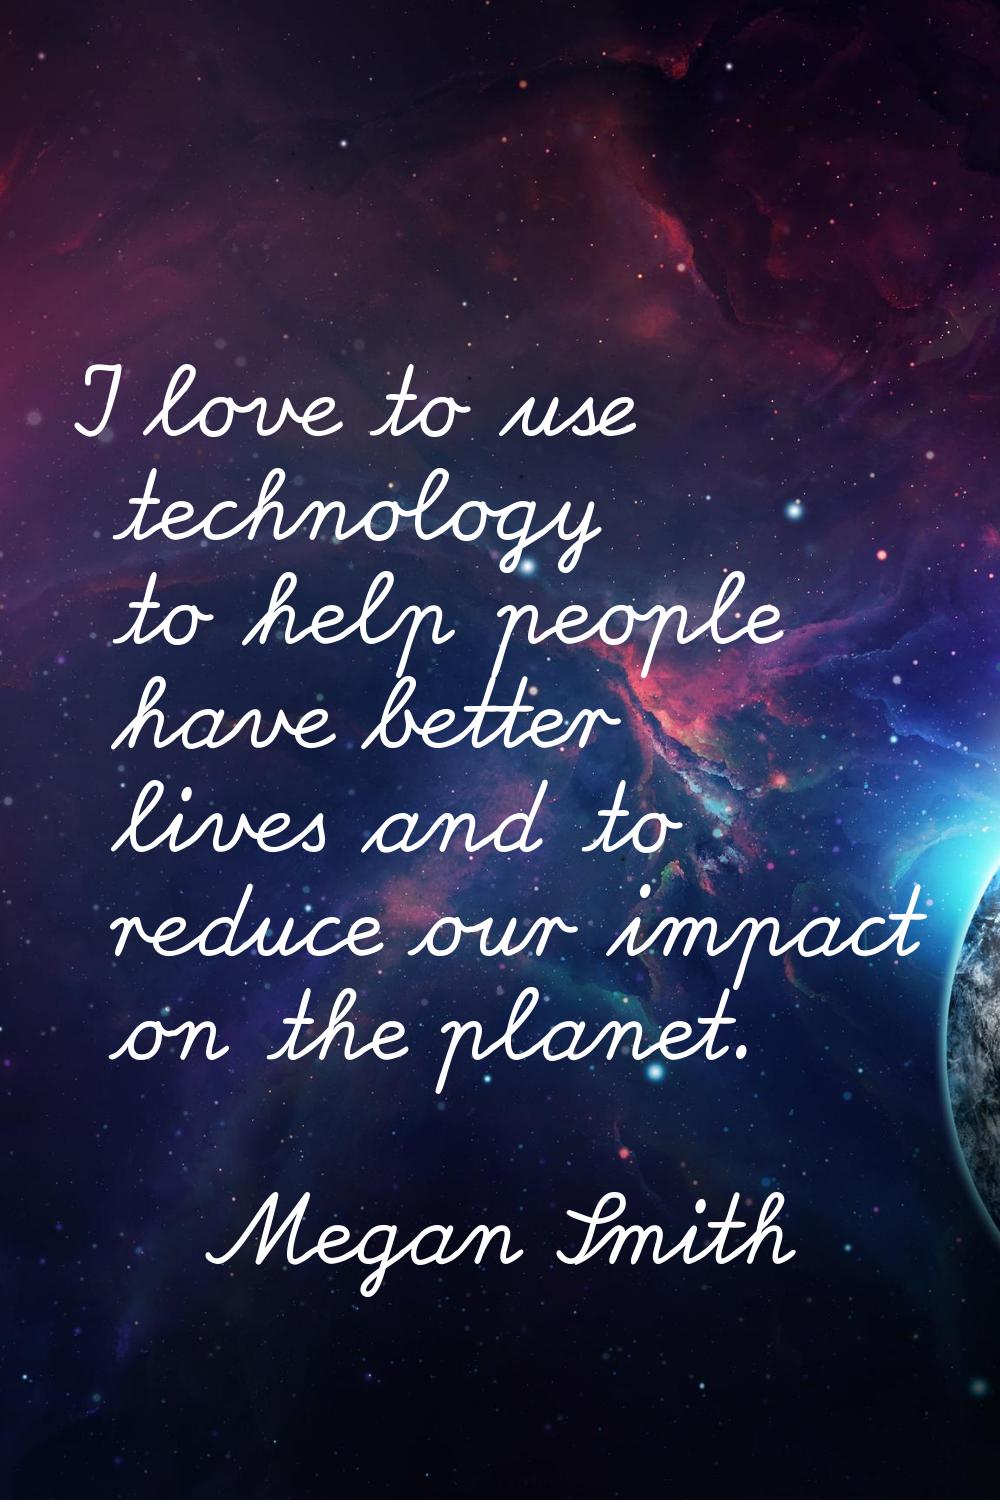 I love to use technology to help people have better lives and to reduce our impact on the planet.